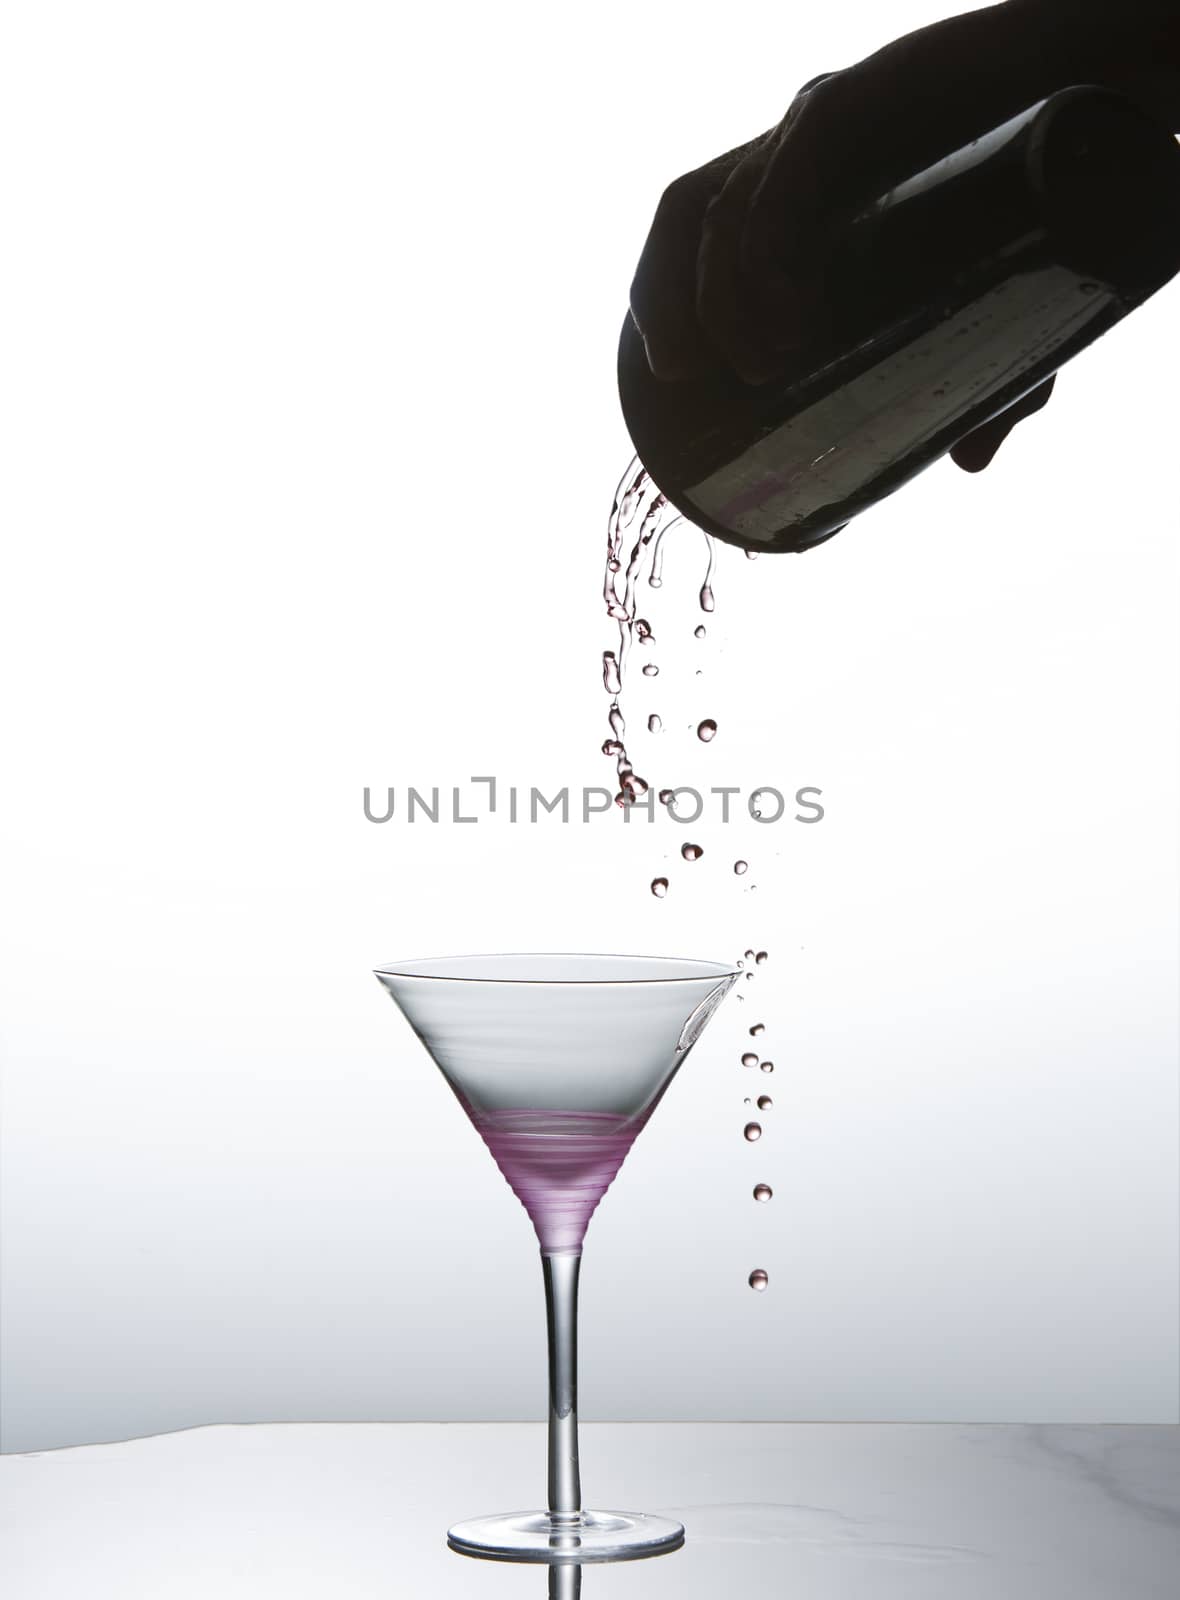 Cocktail being poured into martini glass